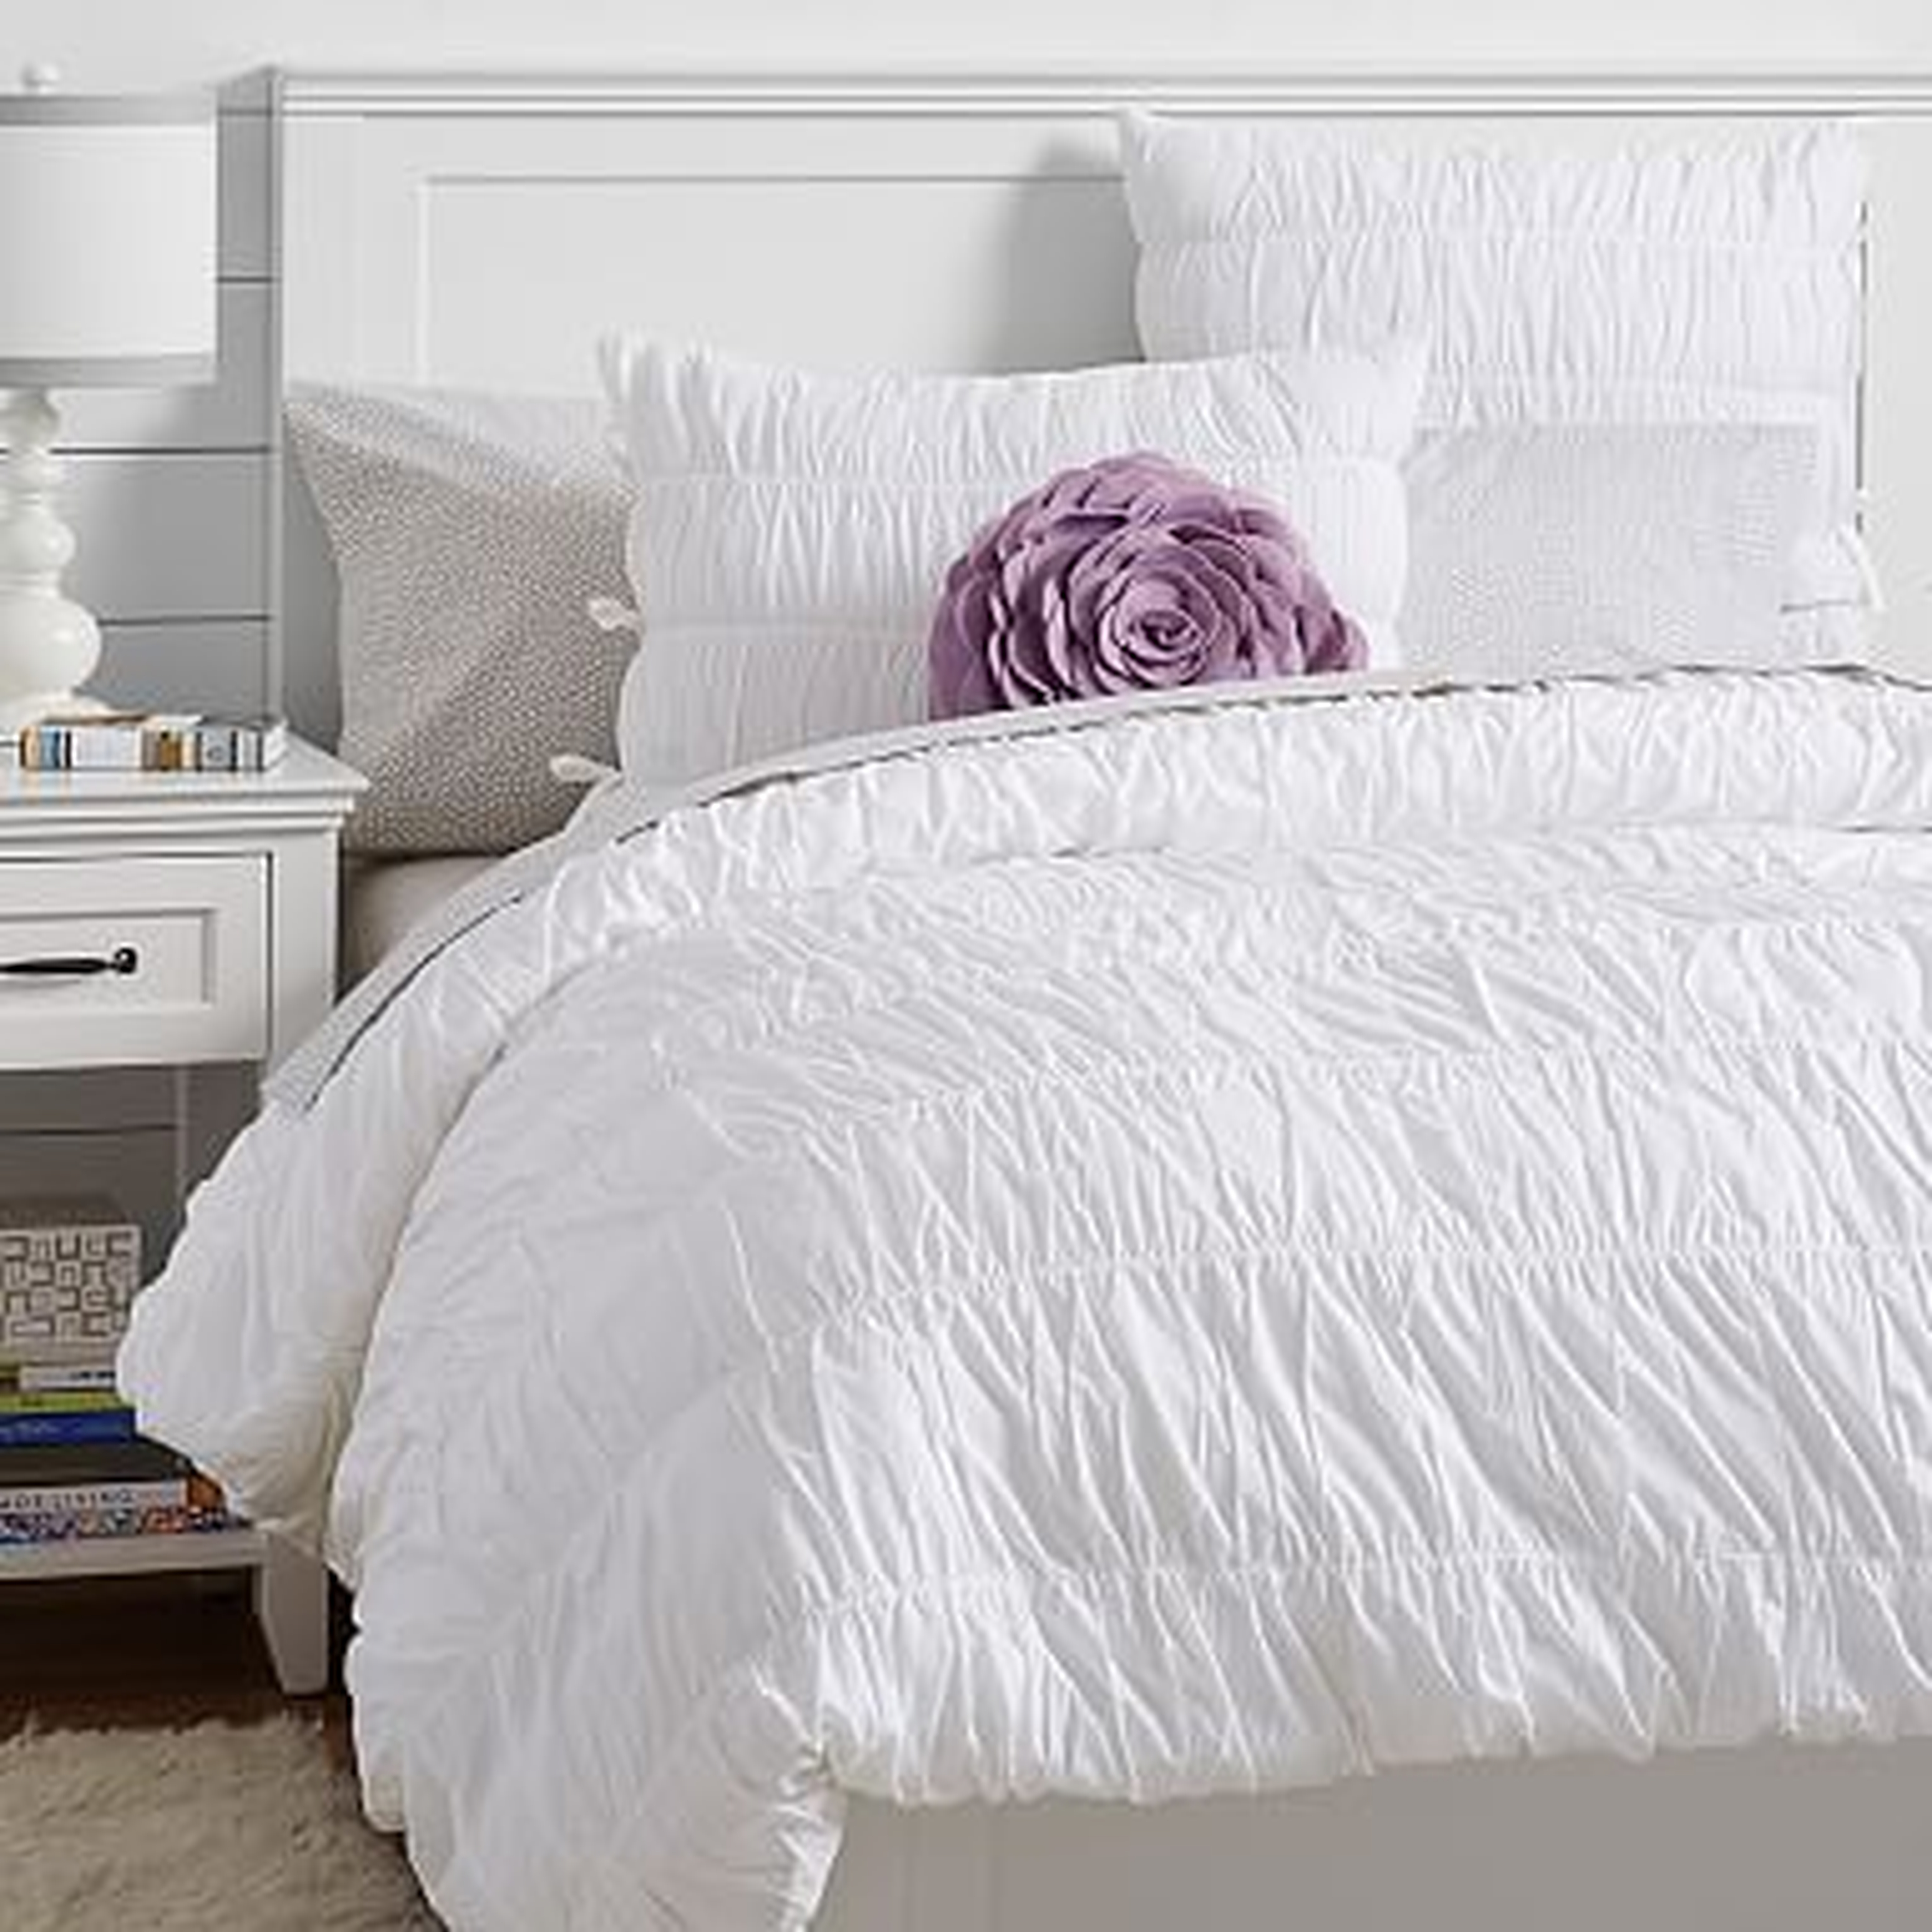 Ruched Duvet Cover, Twin/Twin XL, White - Pottery Barn Teen